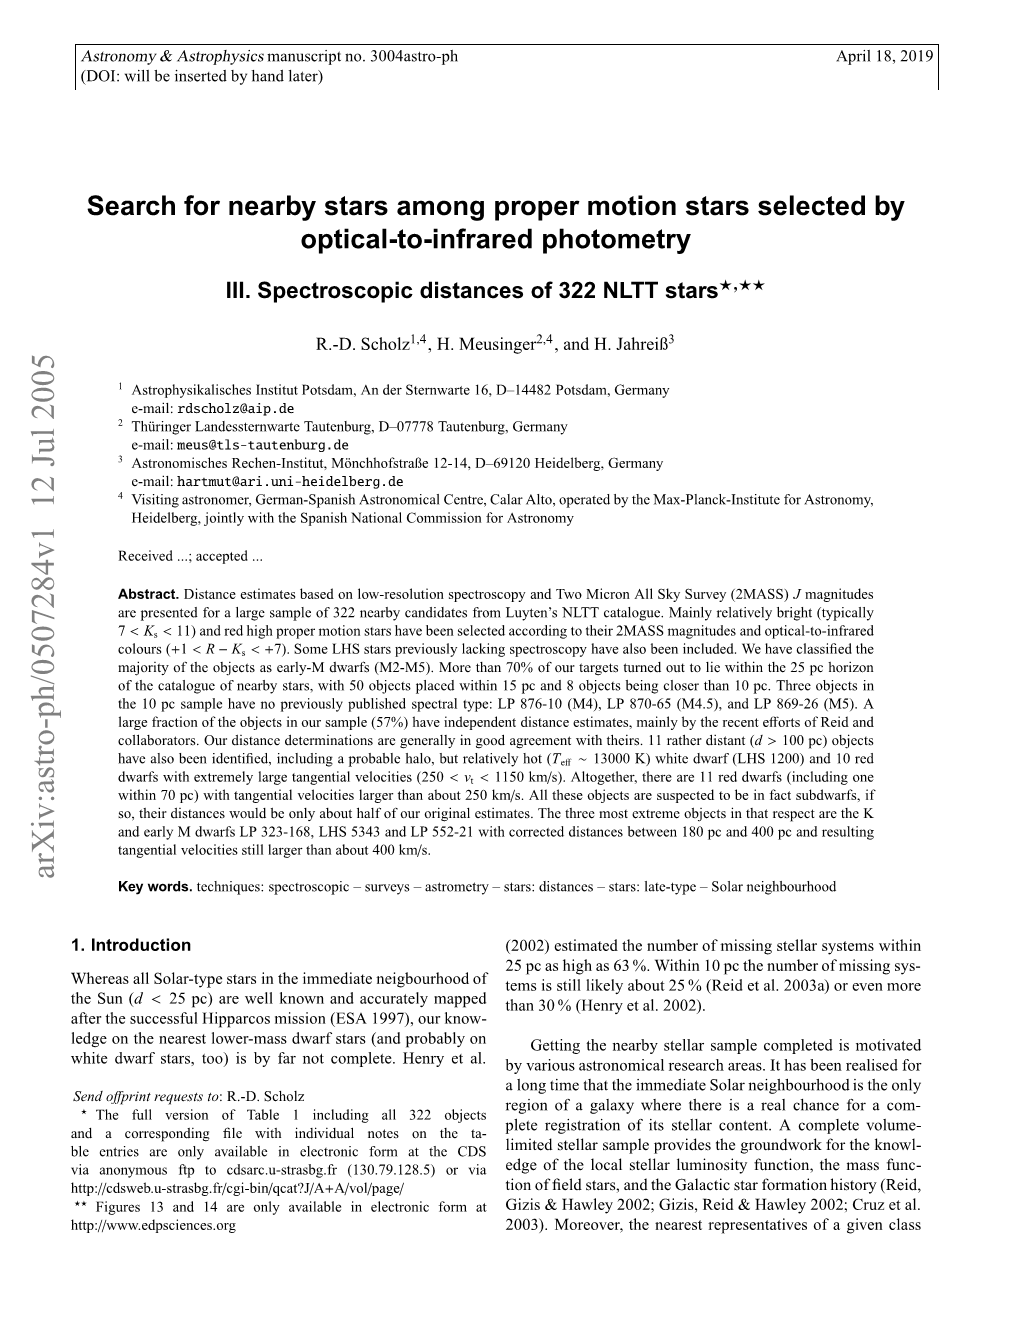 Search for Nearby Stars Among Proper Motion Stars Selected by Optical-To